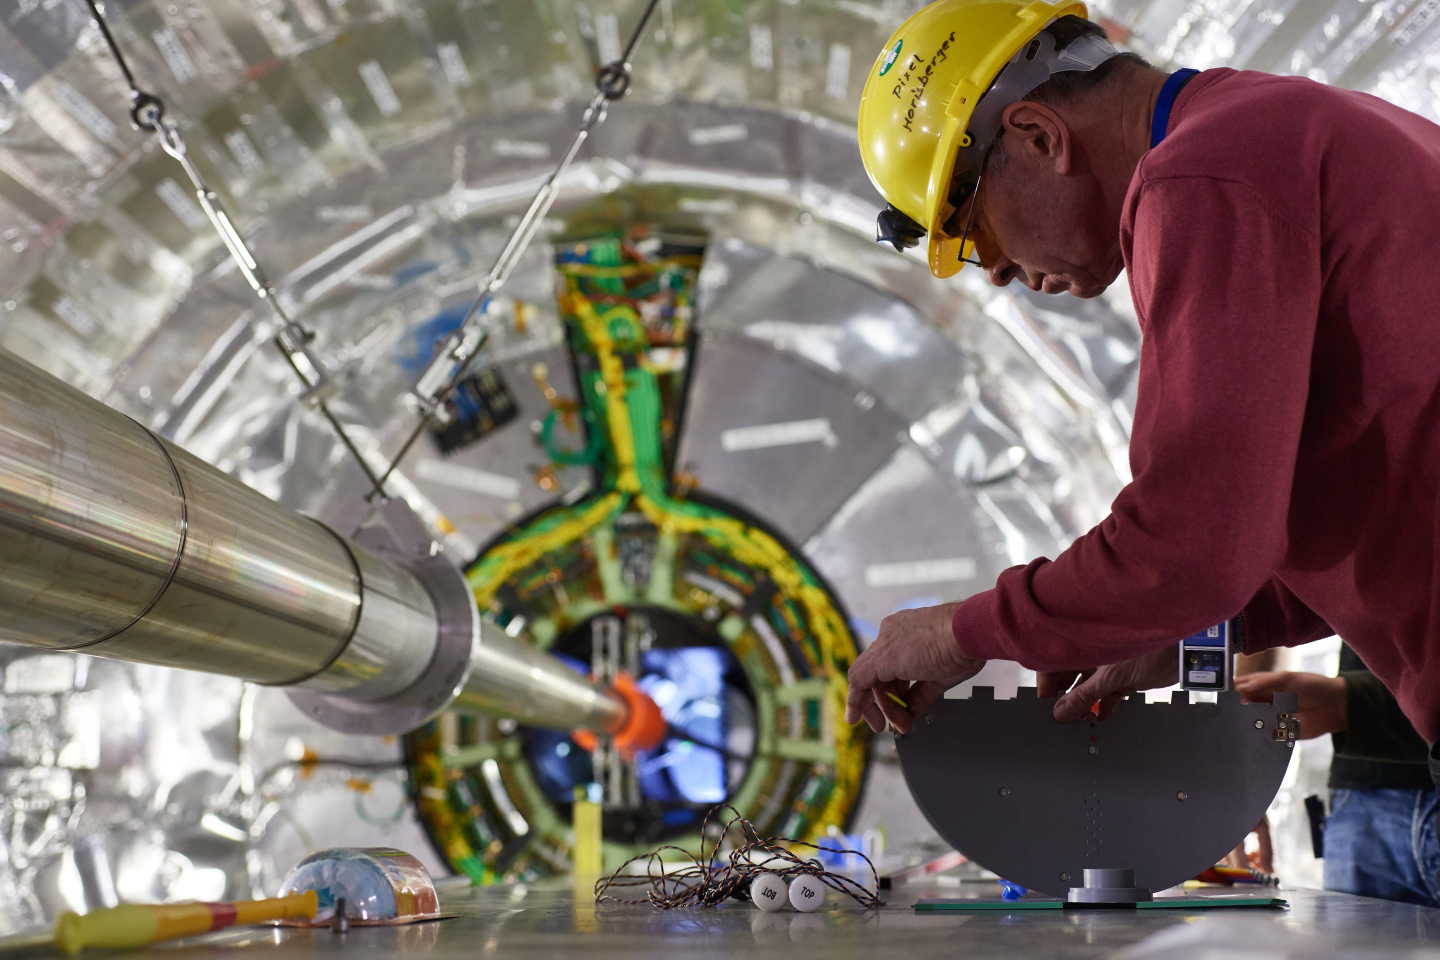 Here’s what open-heart surgery at the LHC looks like